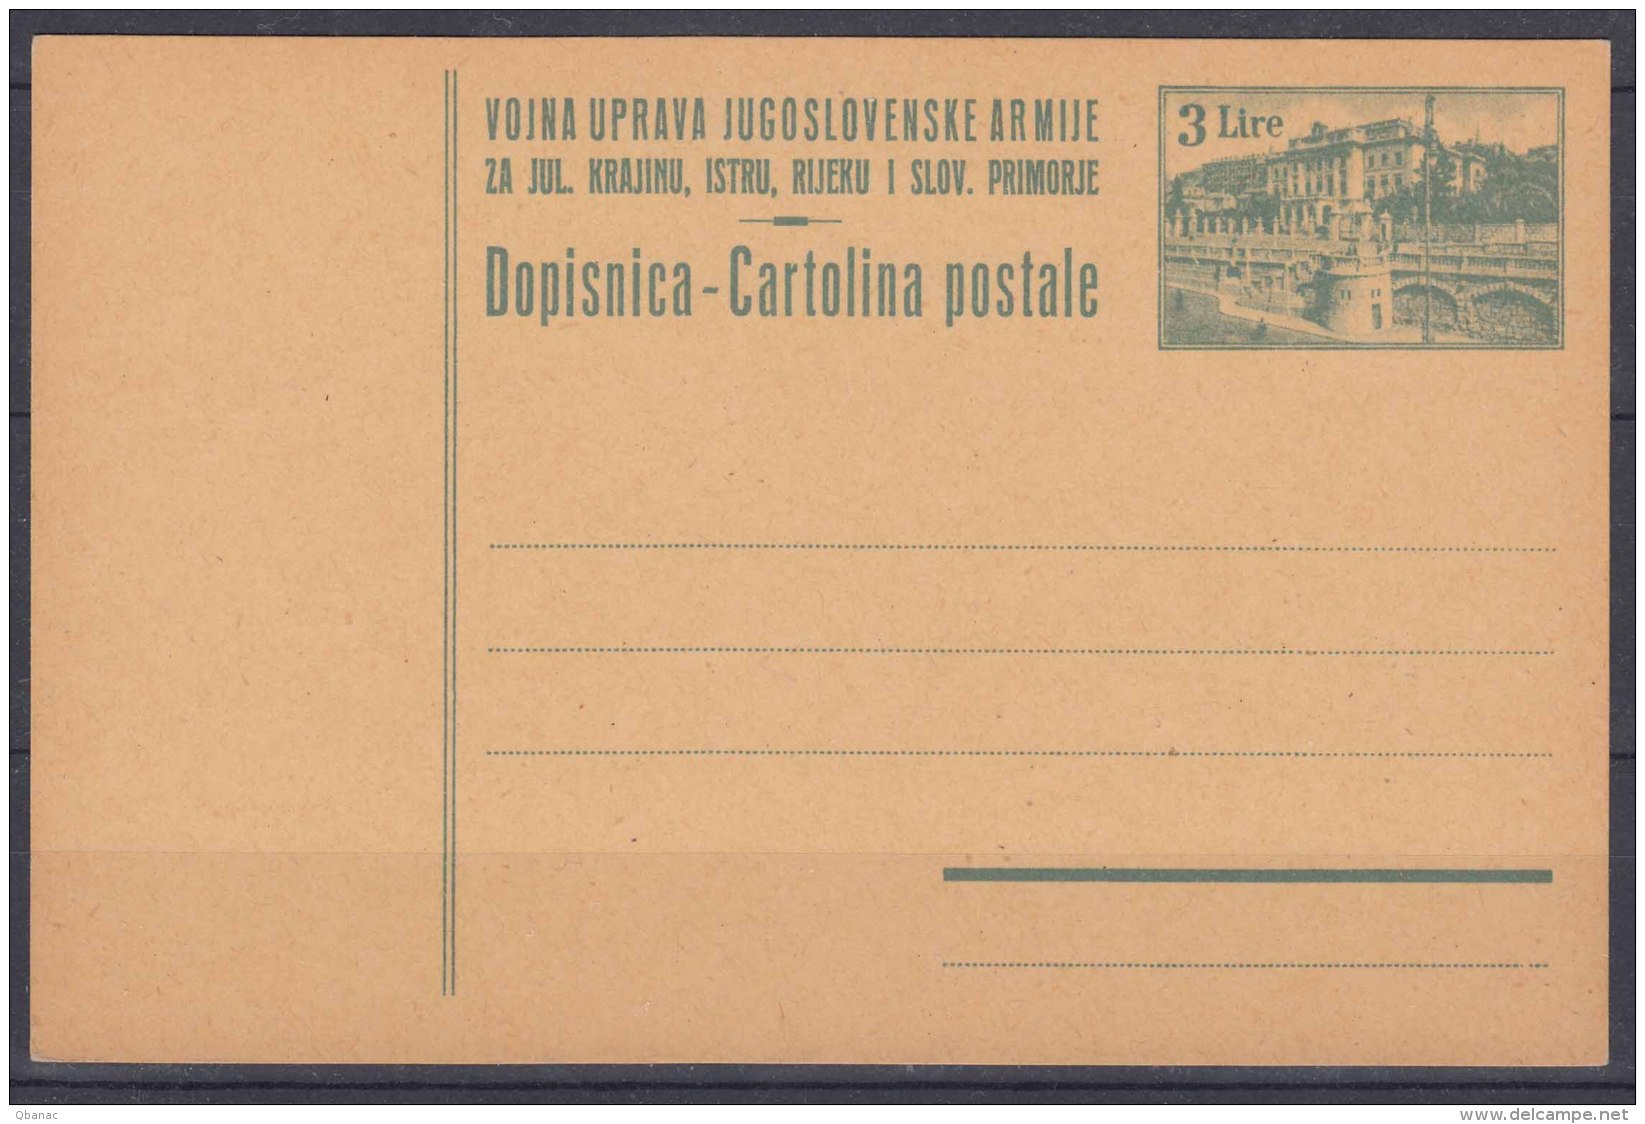 Yugoslavia Occ. Of Italy, Trieste Zone B, Postal Stationery Card In Rare Brown Cardboard Variety, Excellent Mint Cond. - Marcophilia